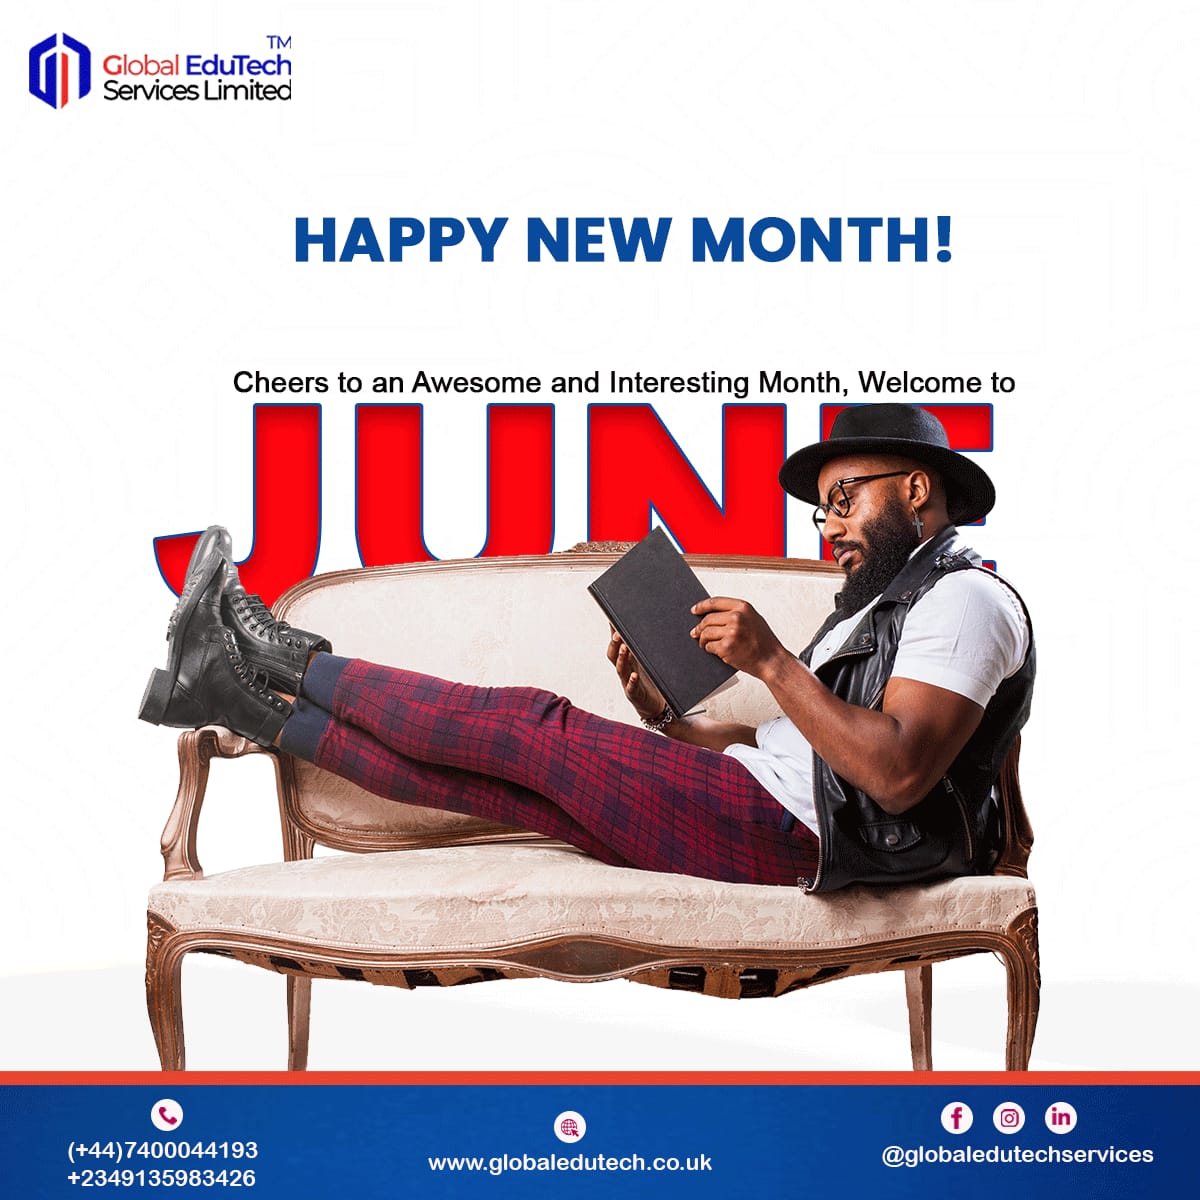 Happy New Month from Global EduTech Services! 

Your study abroad dreams are still possible with us. 

Let's make this month amazing!